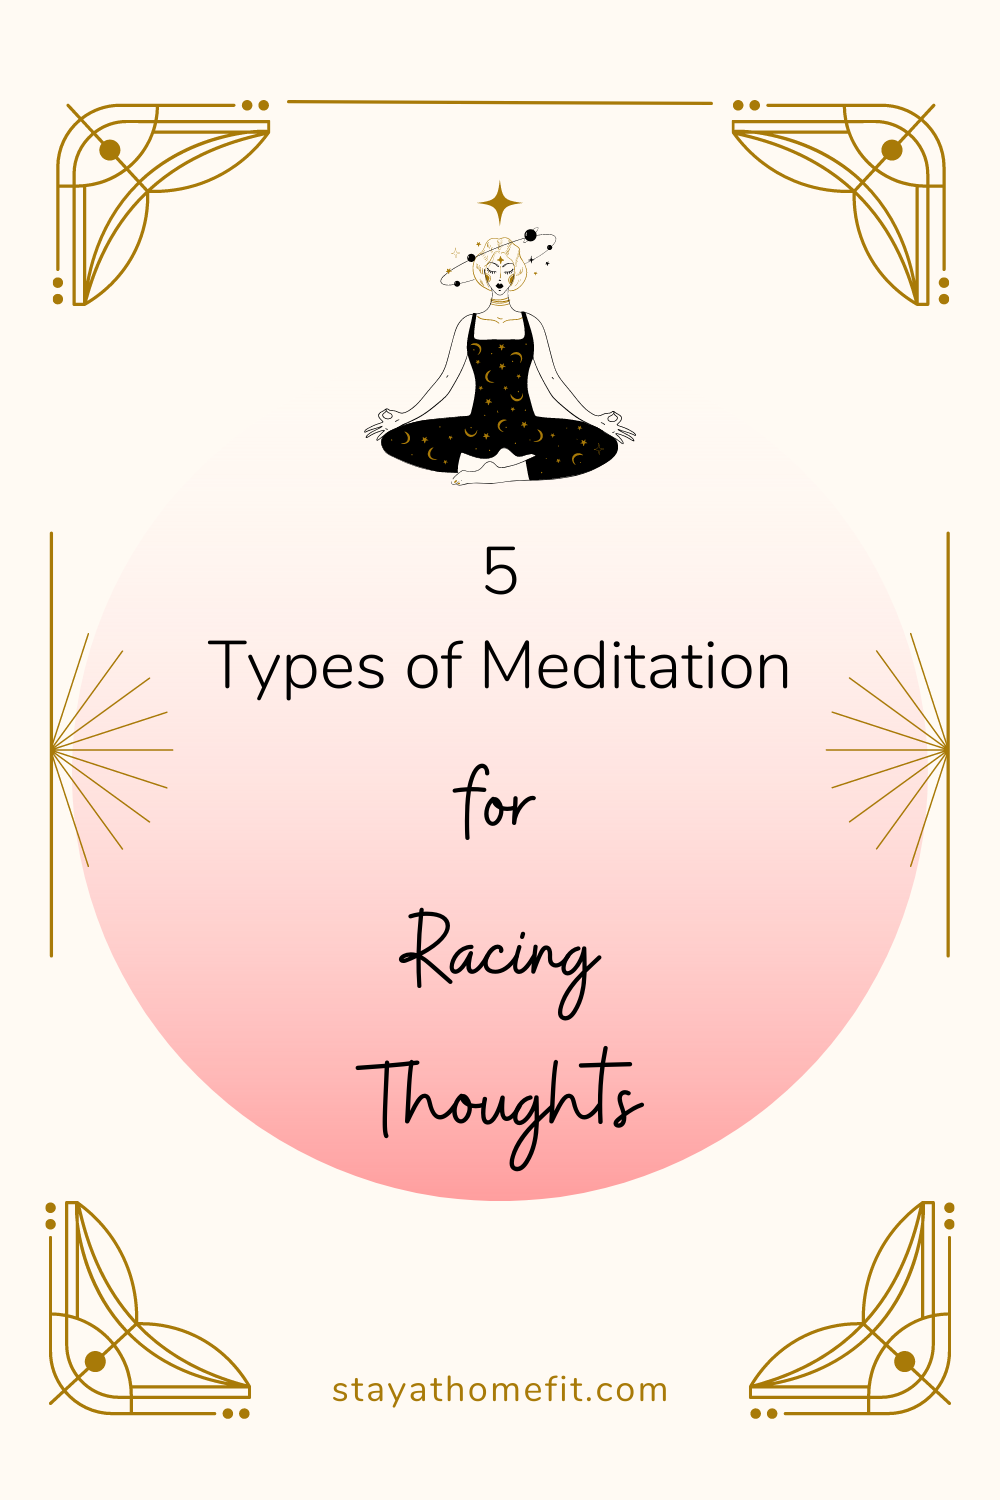 5 Types of Meditation for Racing Thoughts